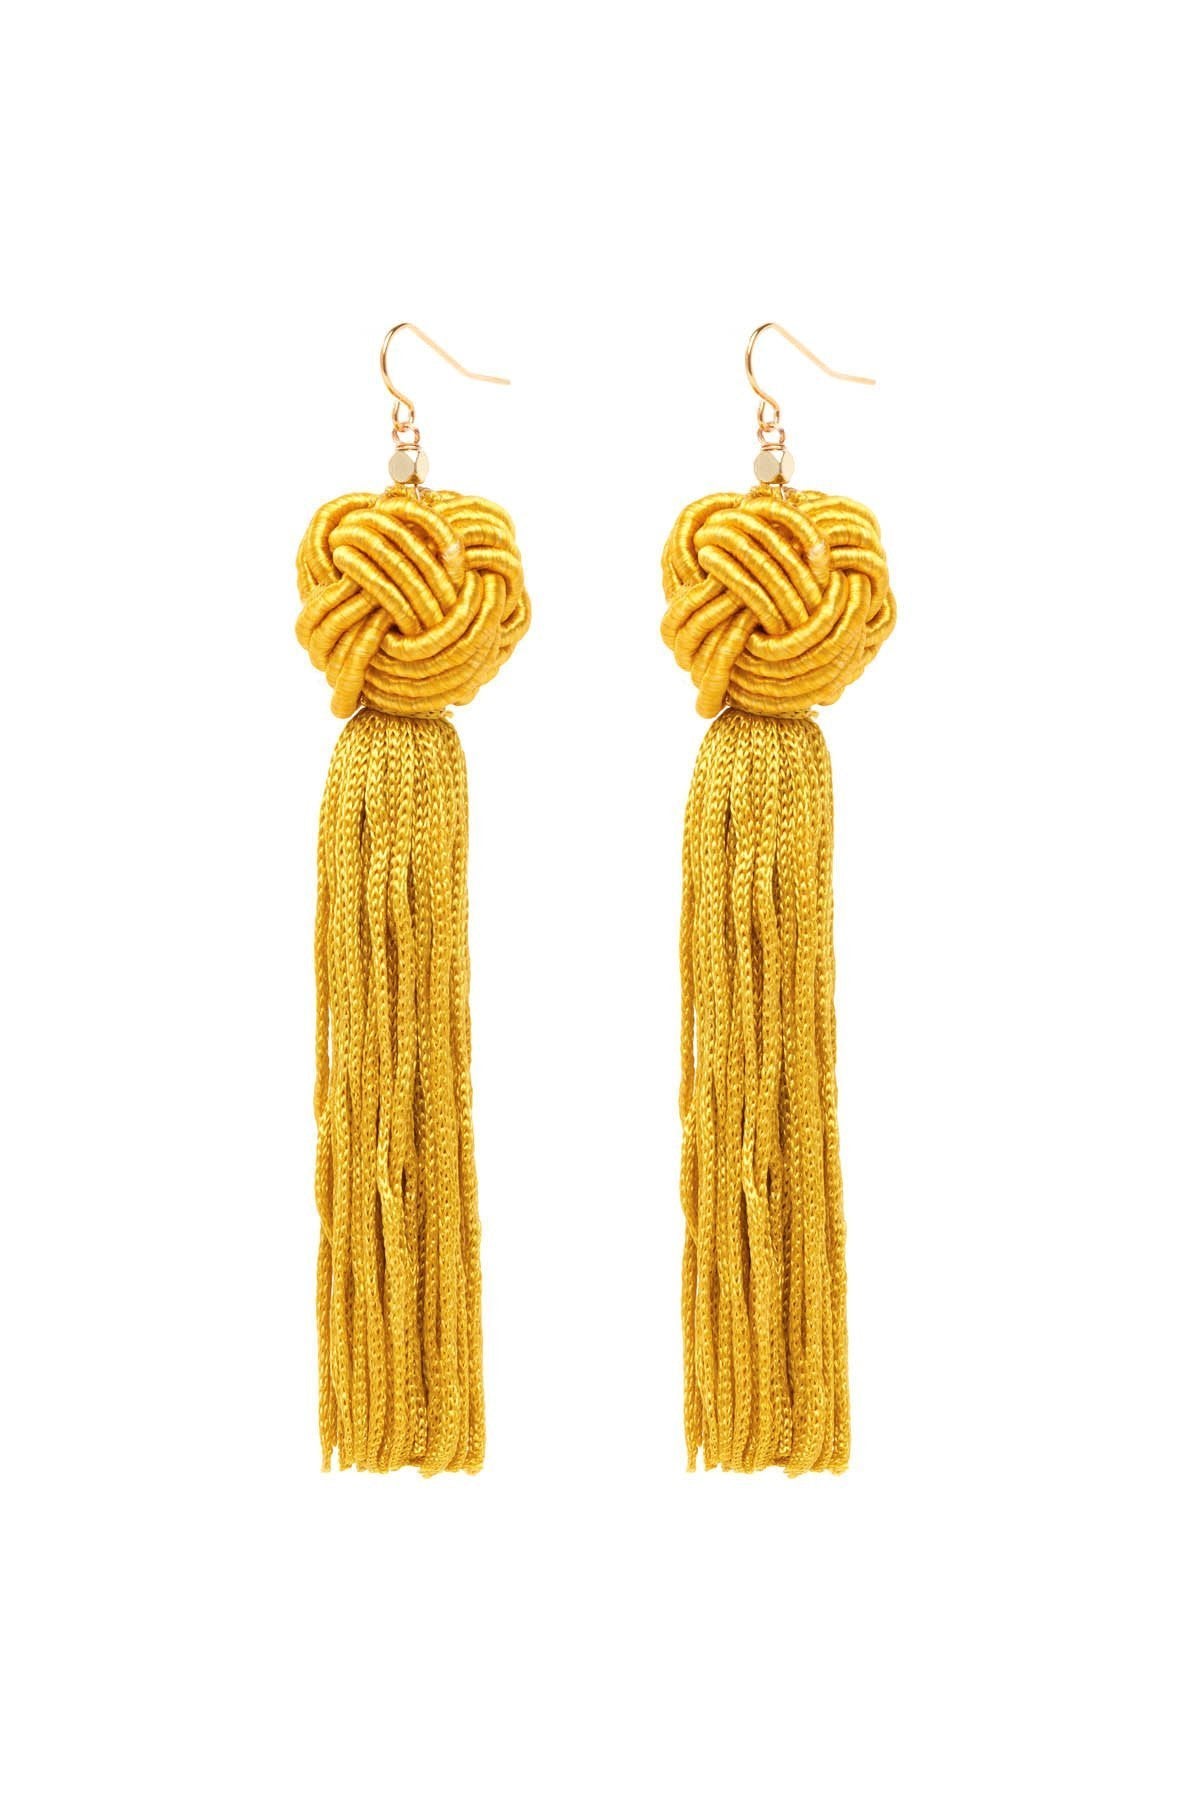 Girl wearing a earrings rental from Vanessa Mooney called The Astrid Gold Knotted Tassel Earrings